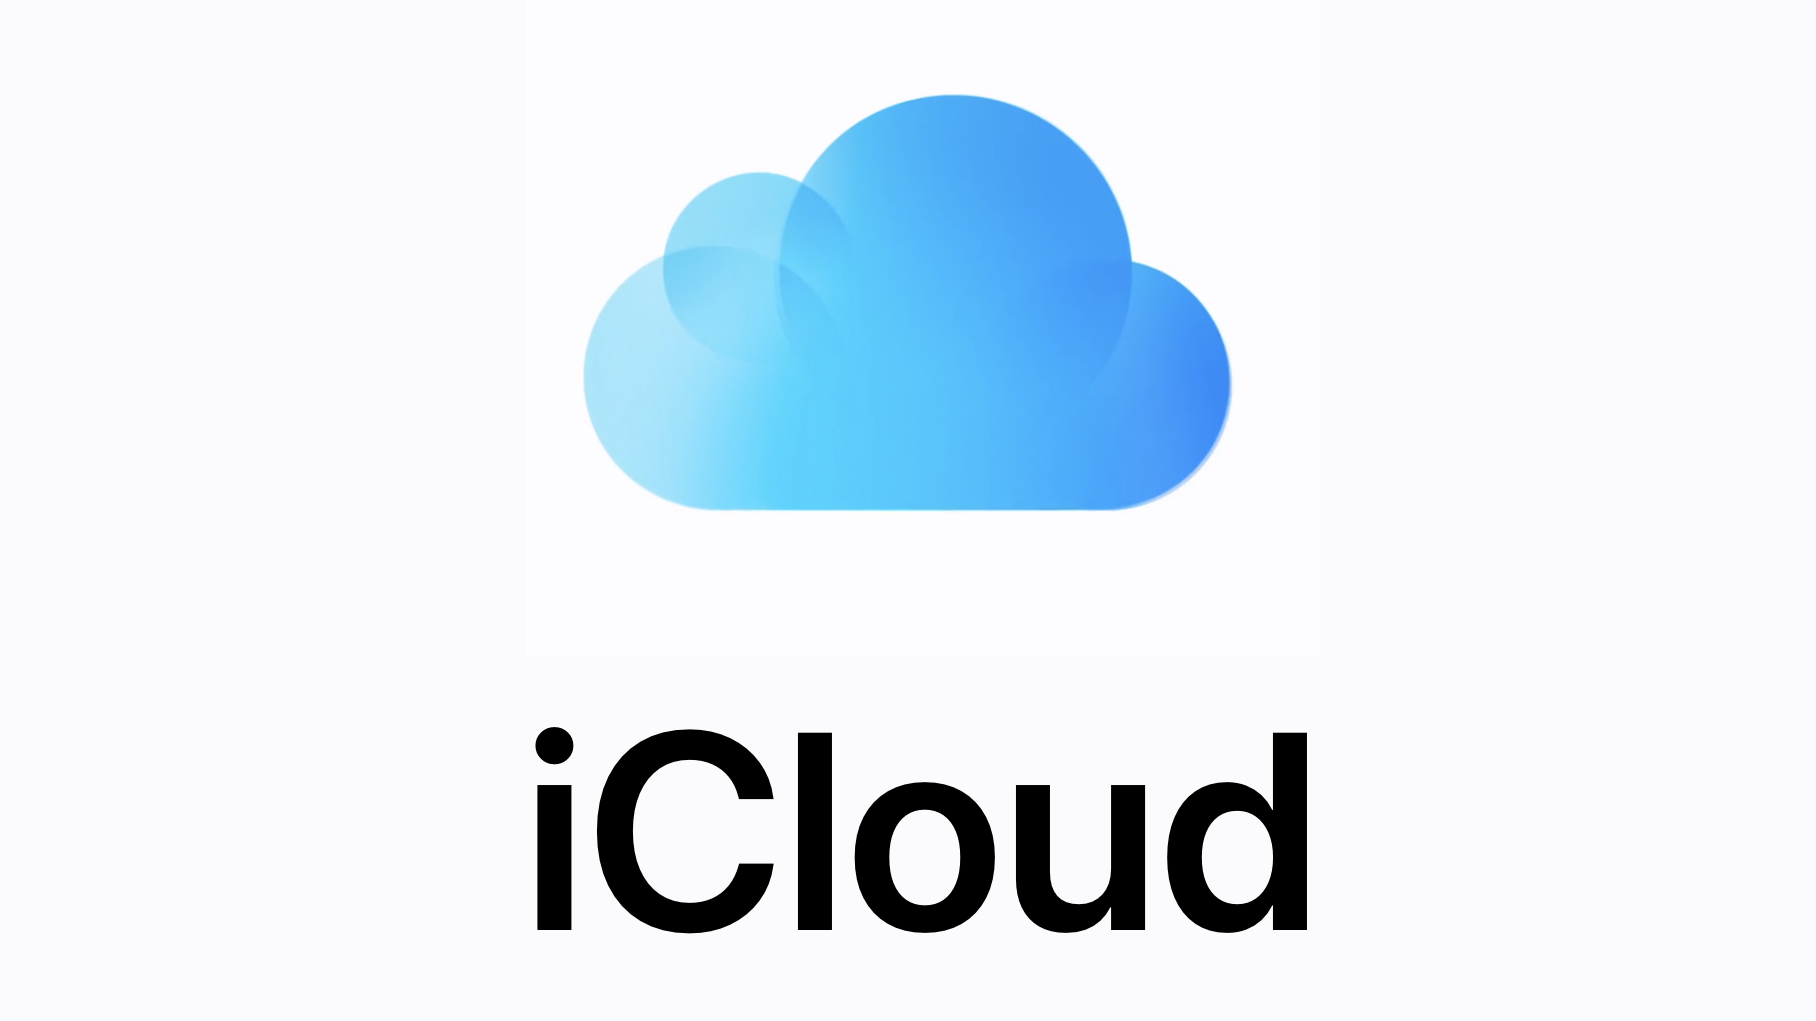 Is Your ICloud Storage Full? 7 Tips On How To Free Up Space